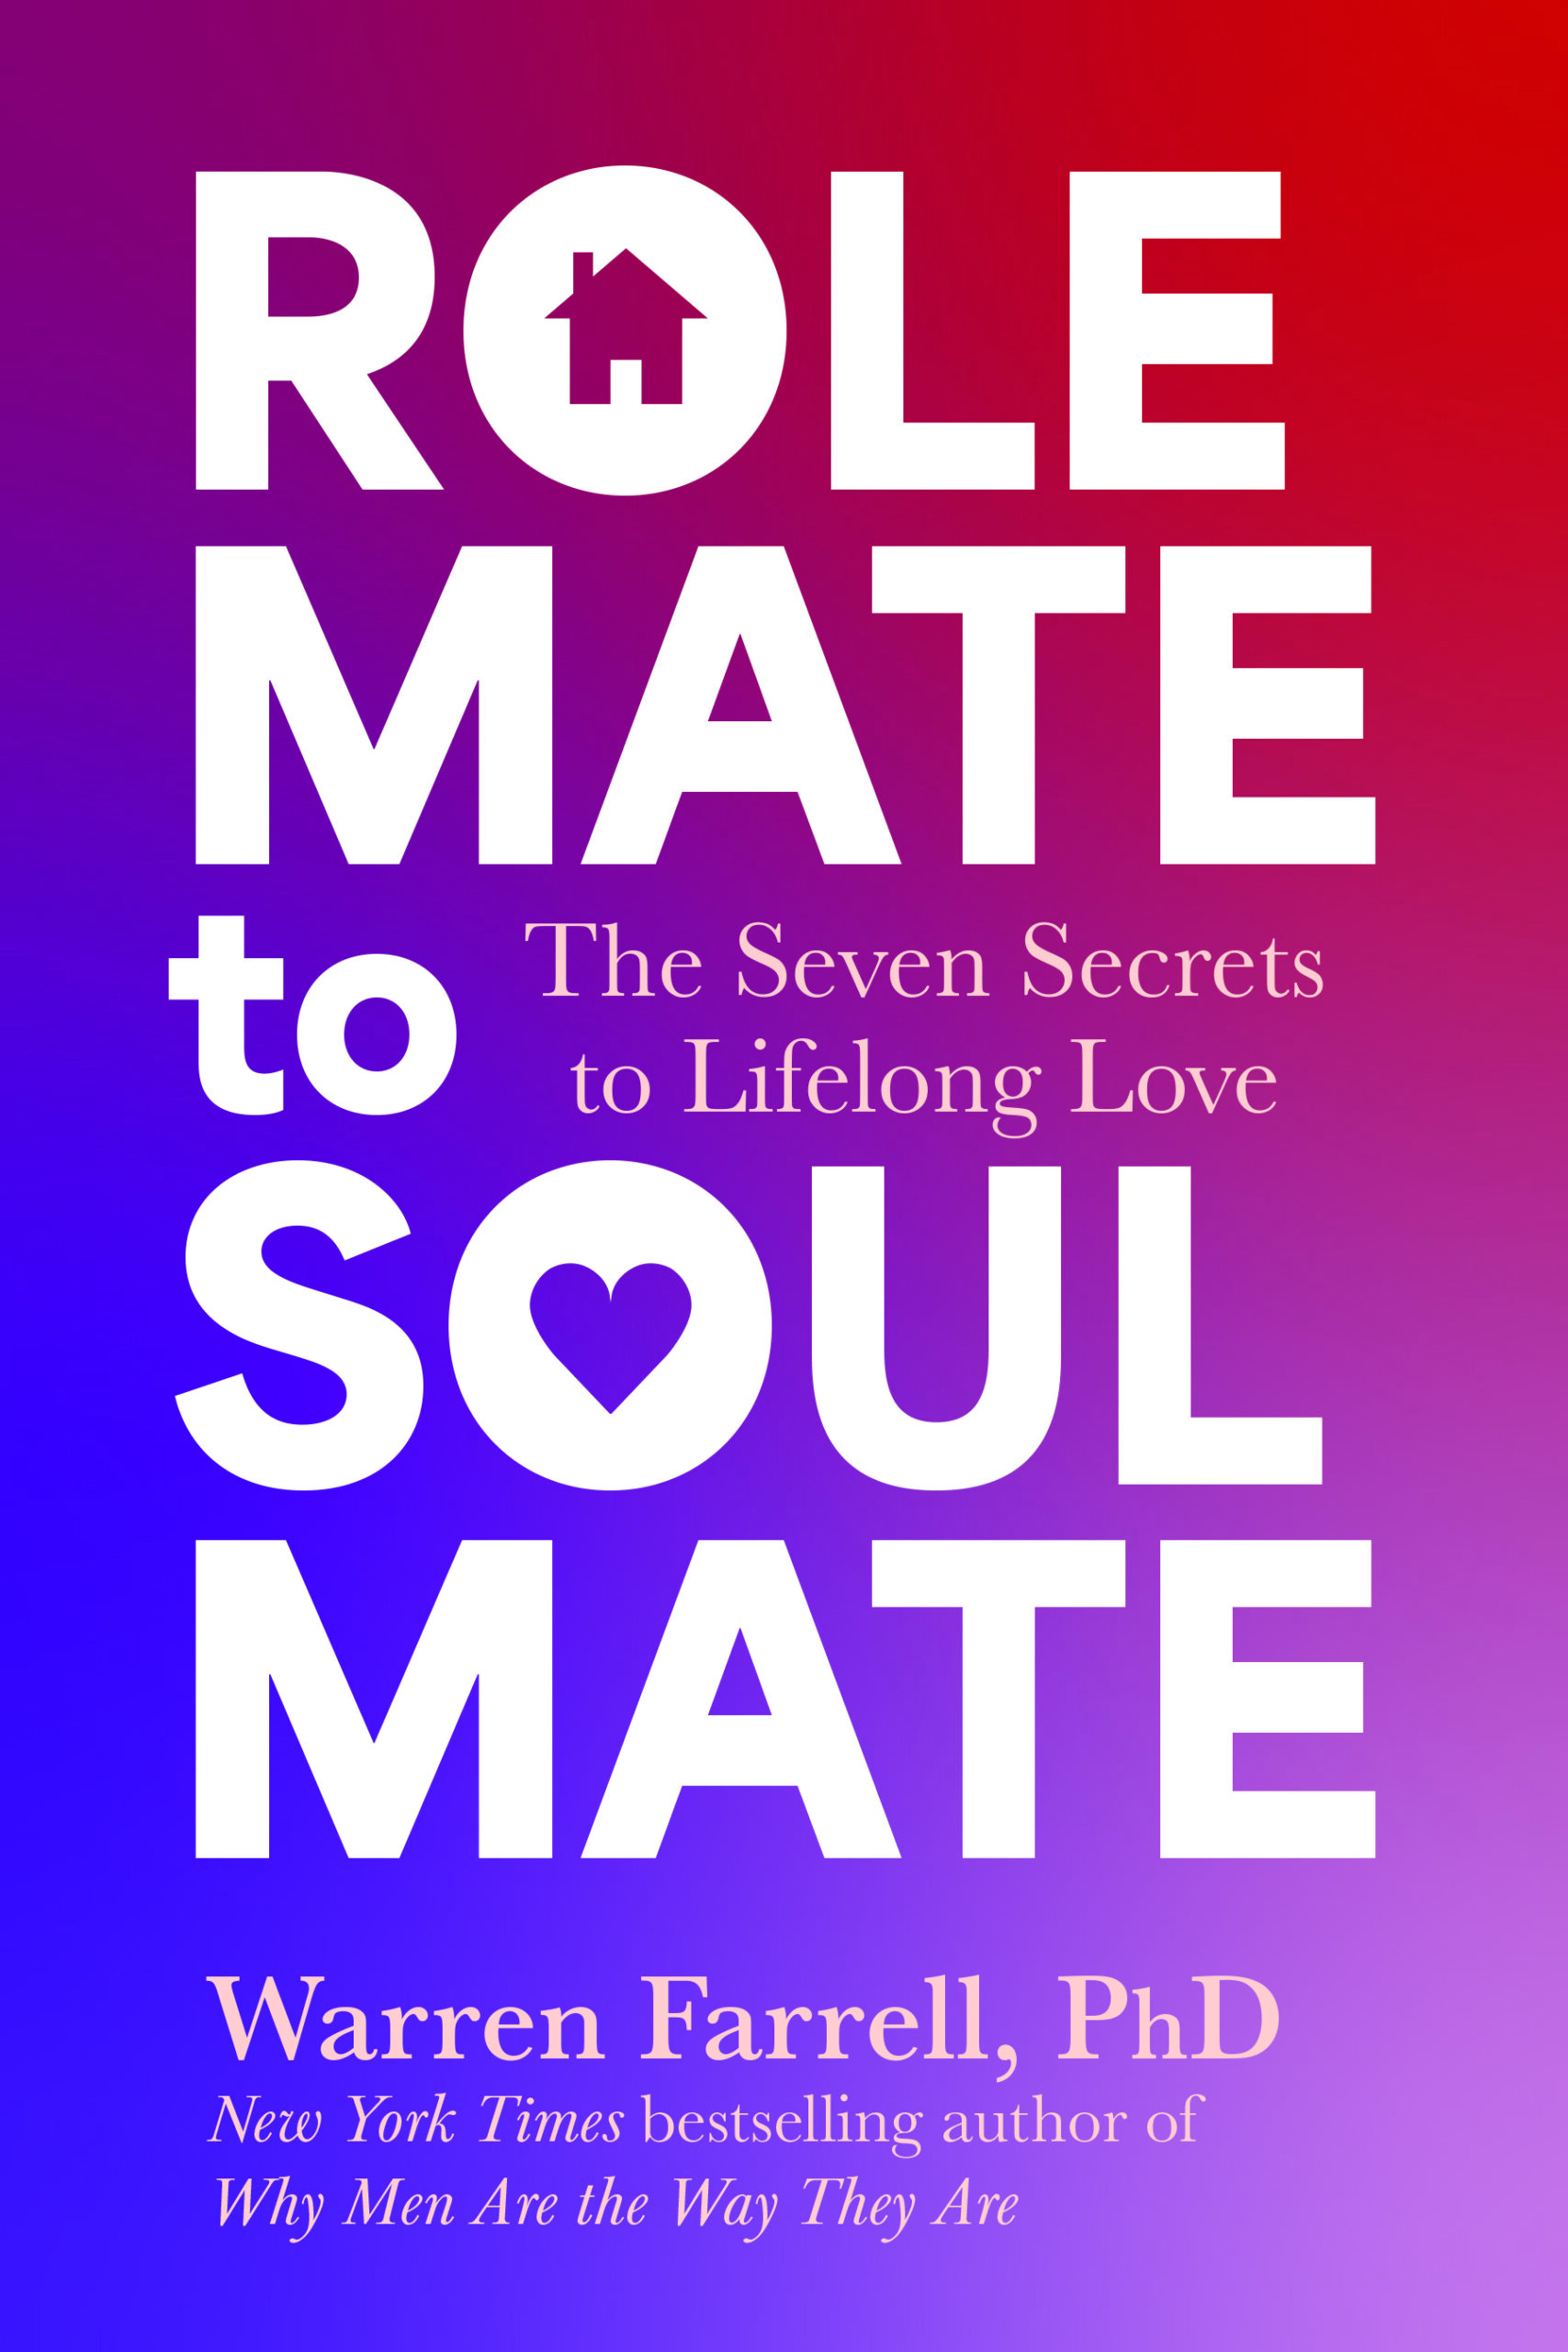 Role Mate to Soul Mate™